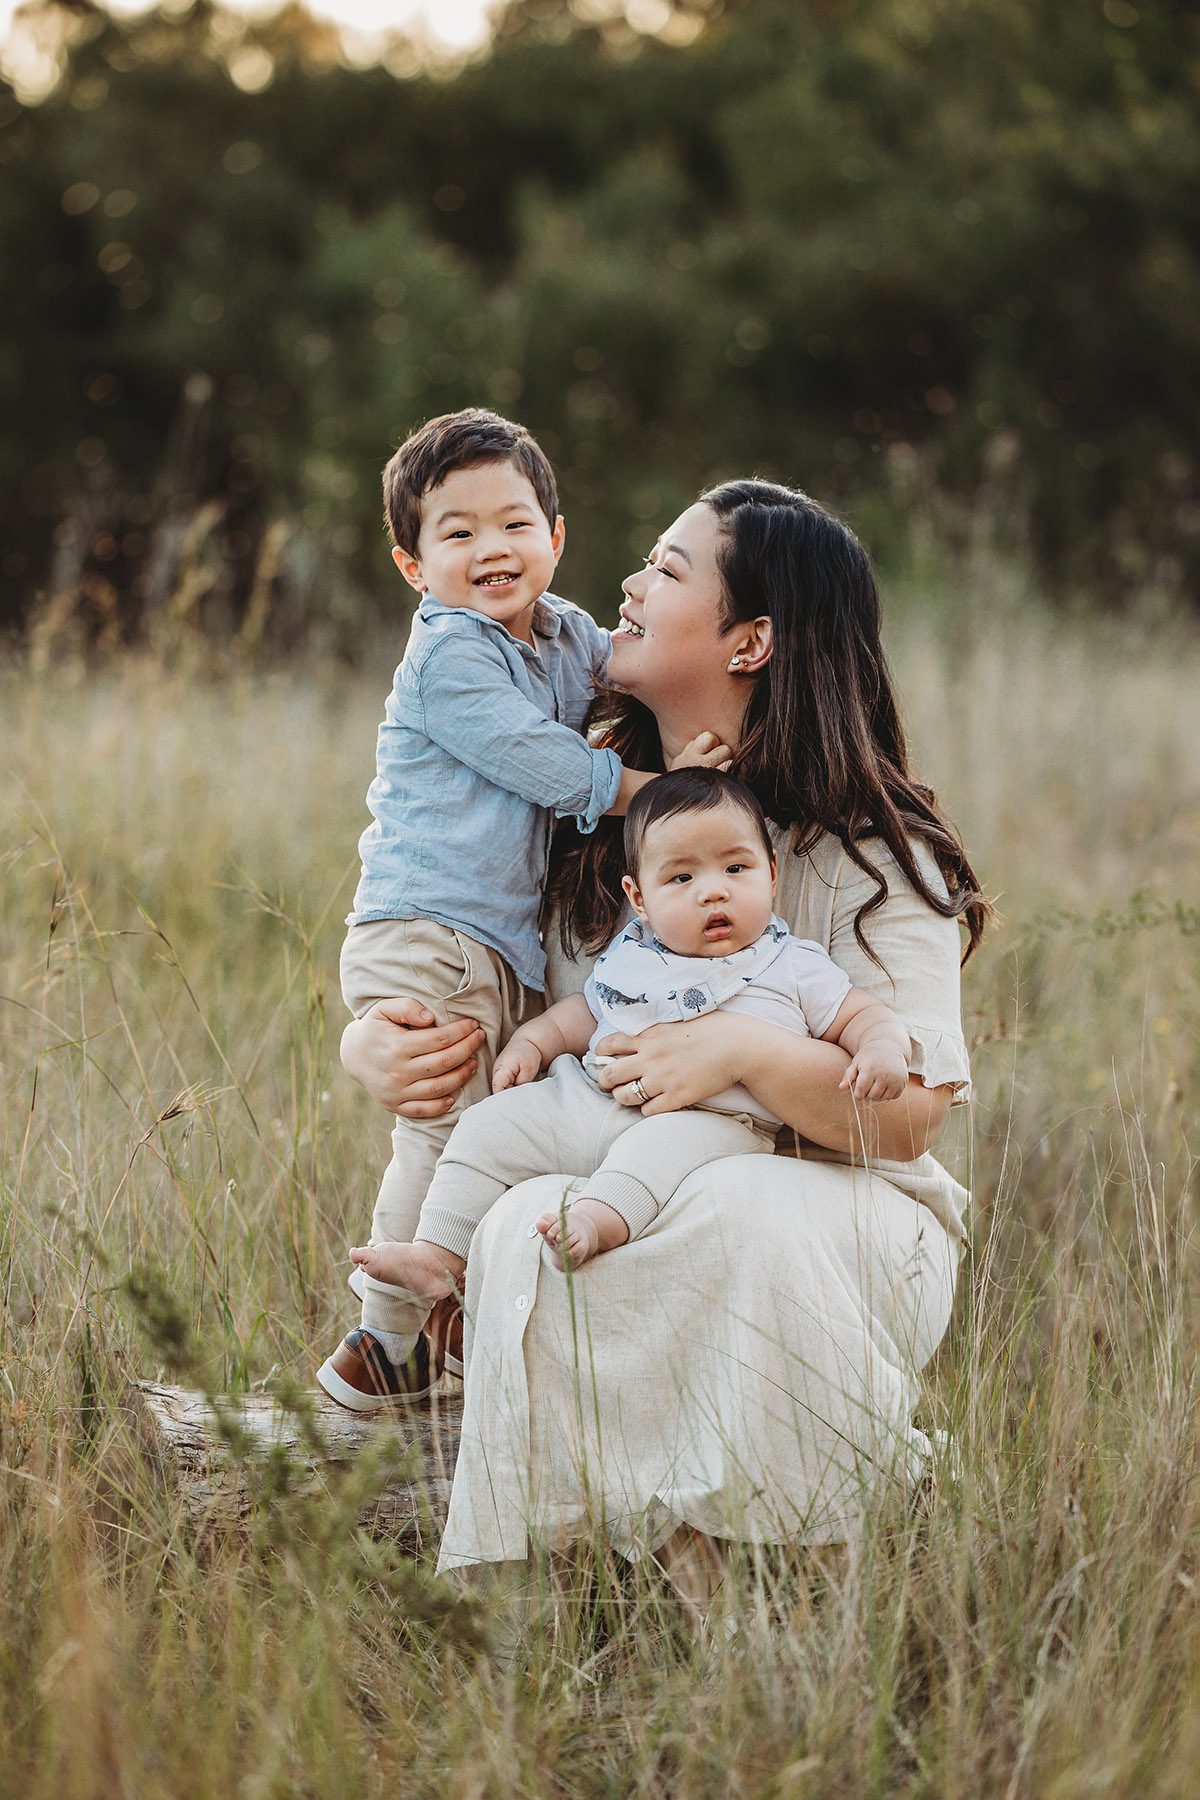 A mother sits in a grassy field with her 2 little boys sitting in her lap